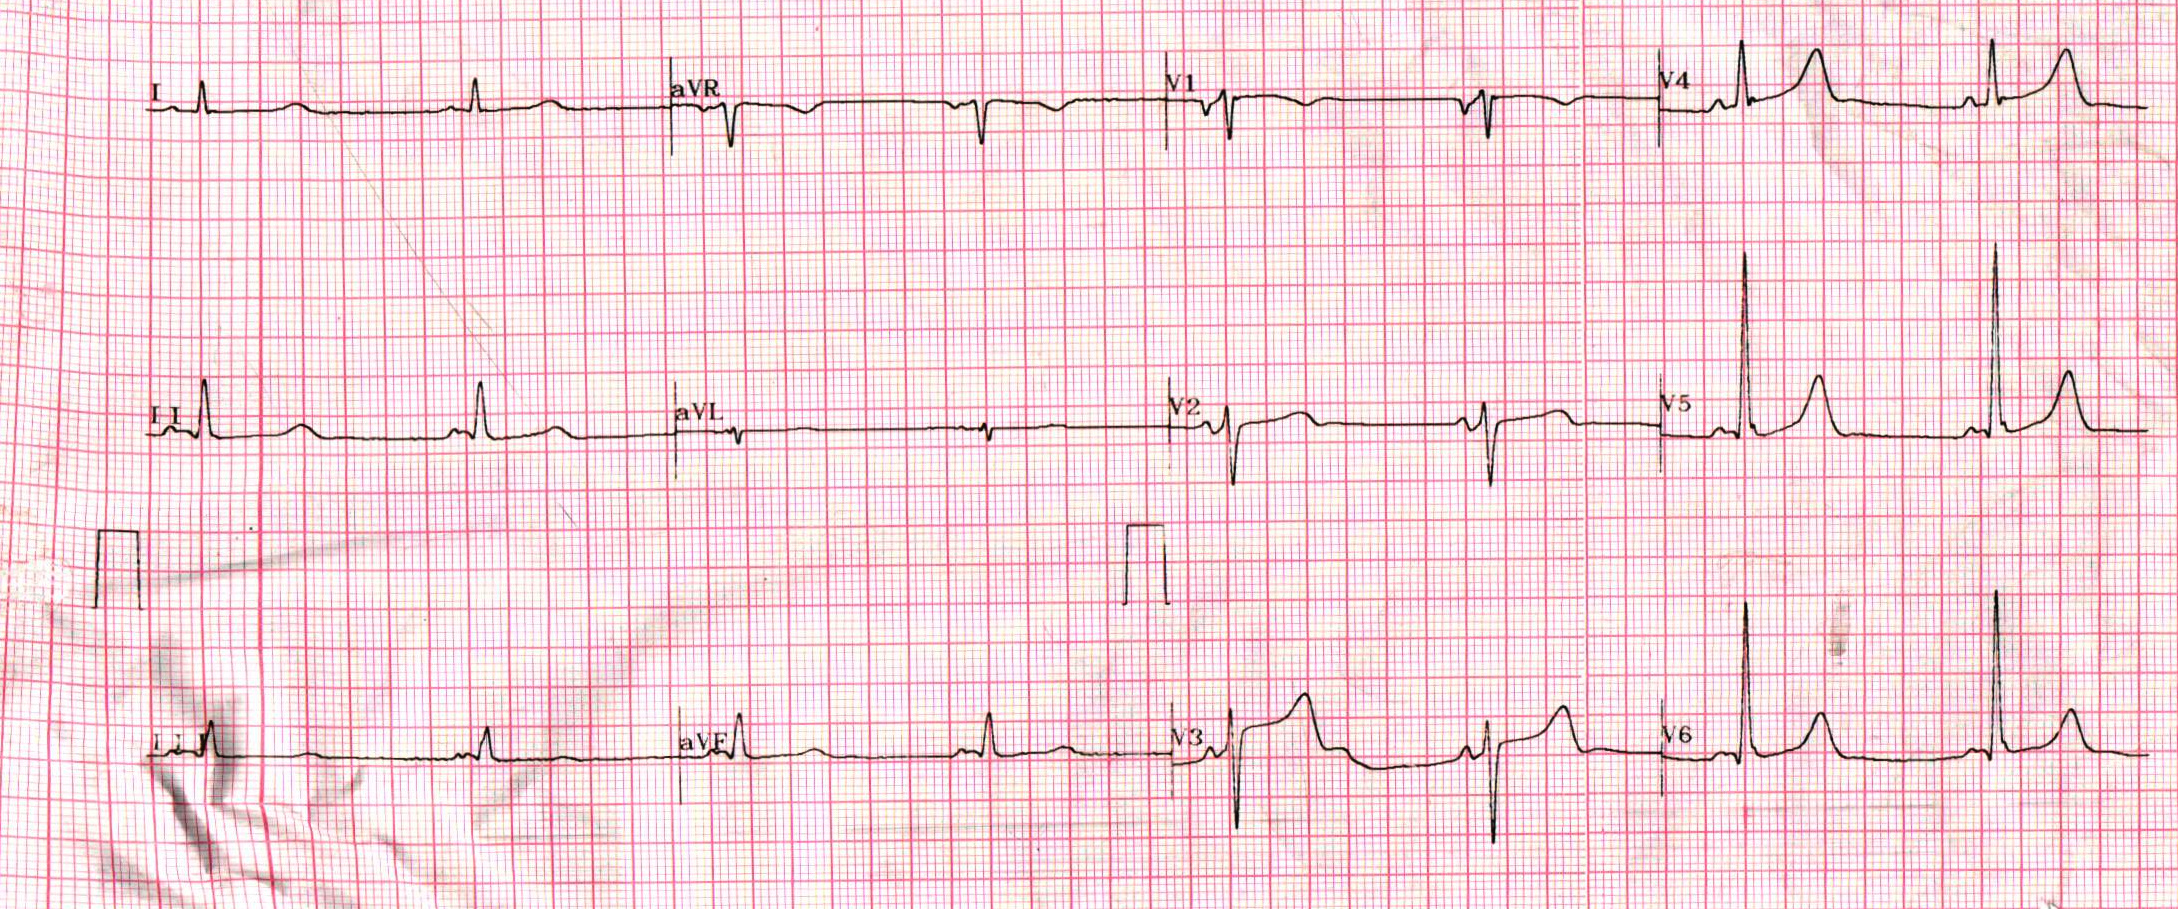 Wpw Syndrome How To Read Ecg